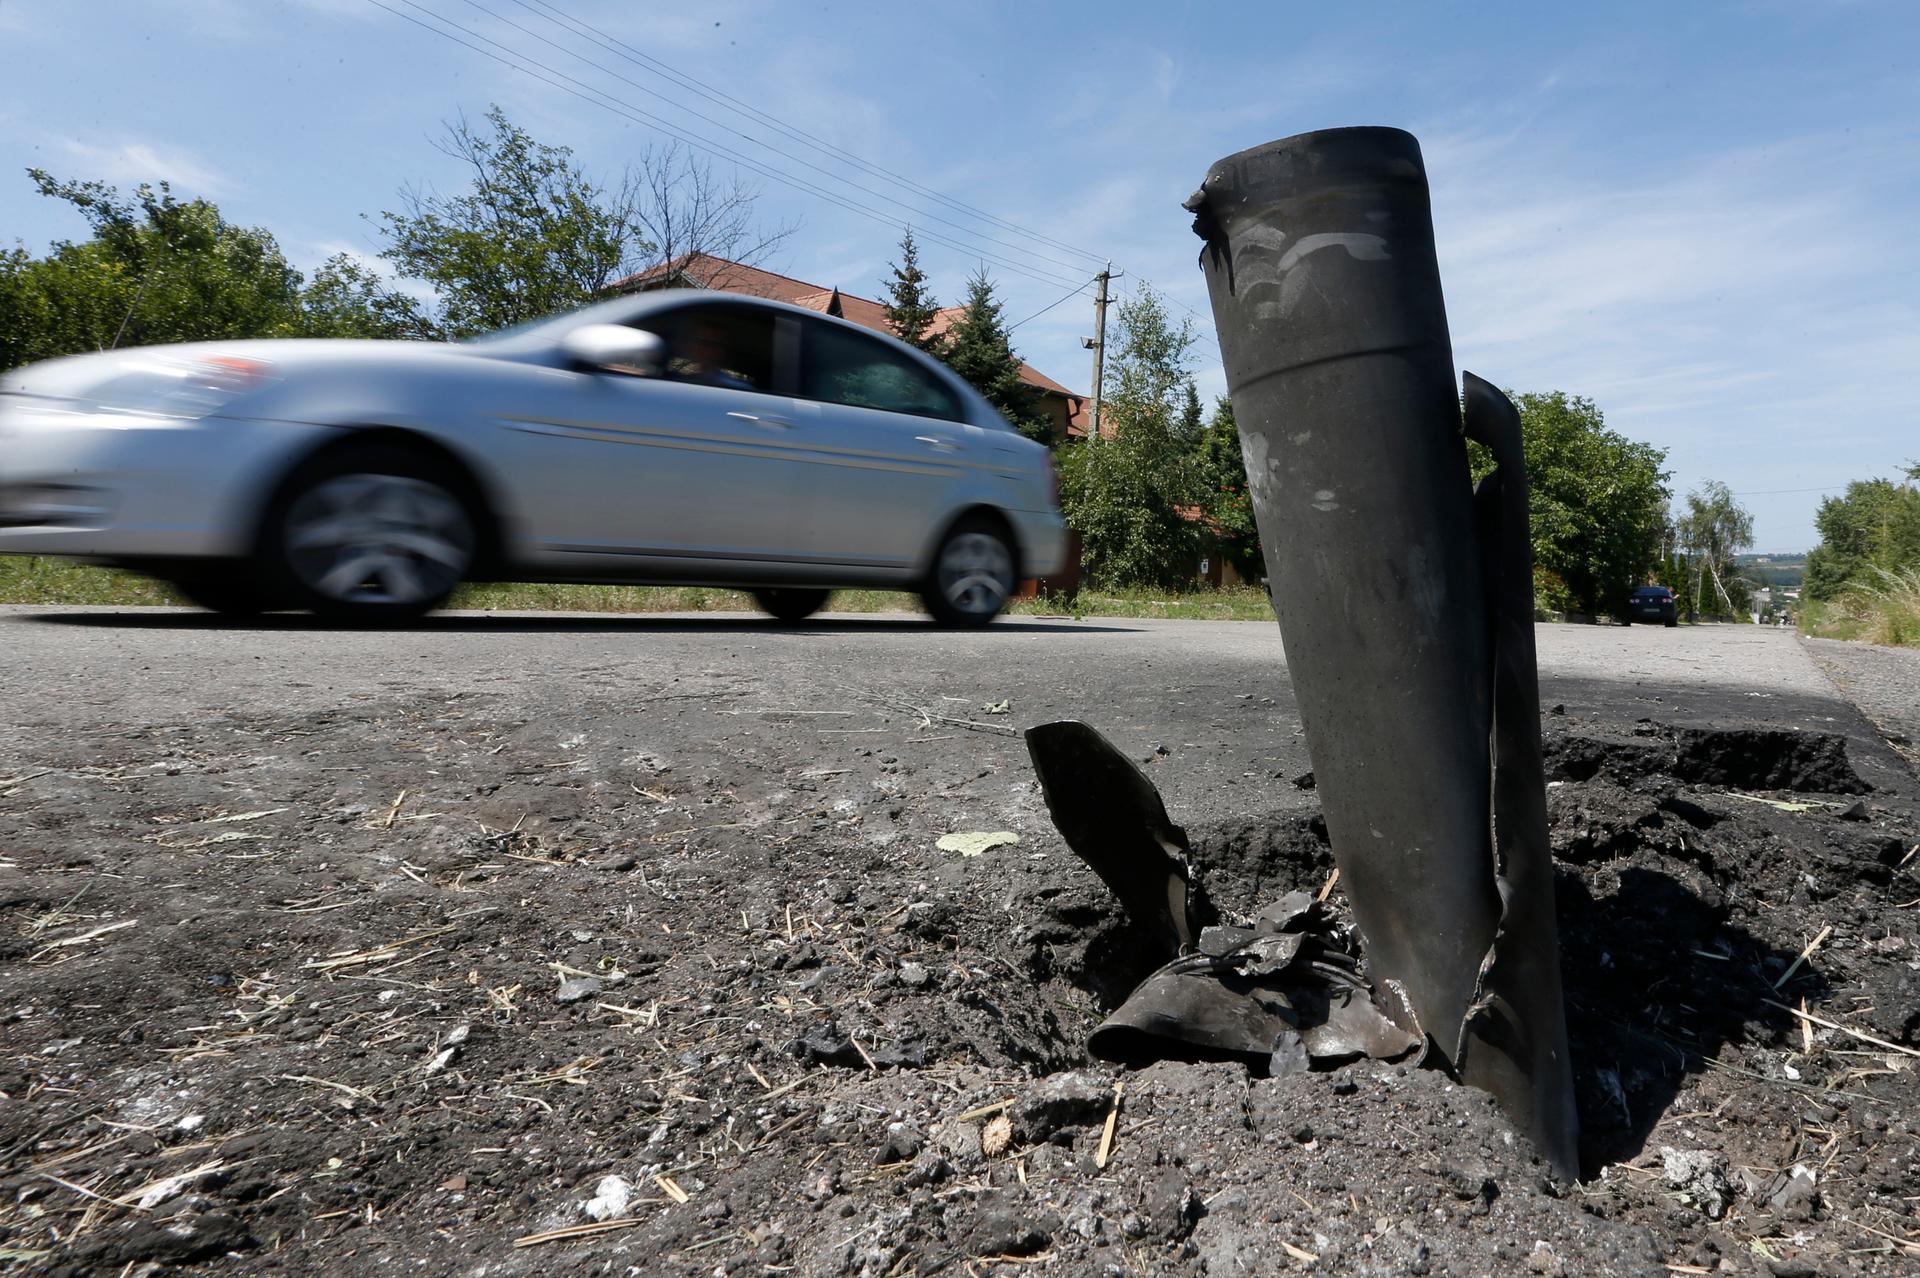 A car drives past the remains of a spent ammunition on the suburbs of Donetsk, Tuesday. Intense fighting between Ukrainian troops and pro-Russian rebels in eastern Ukraine killed dozens of civilians, soldiers and rebels, as Kiev pressed on with an offensi